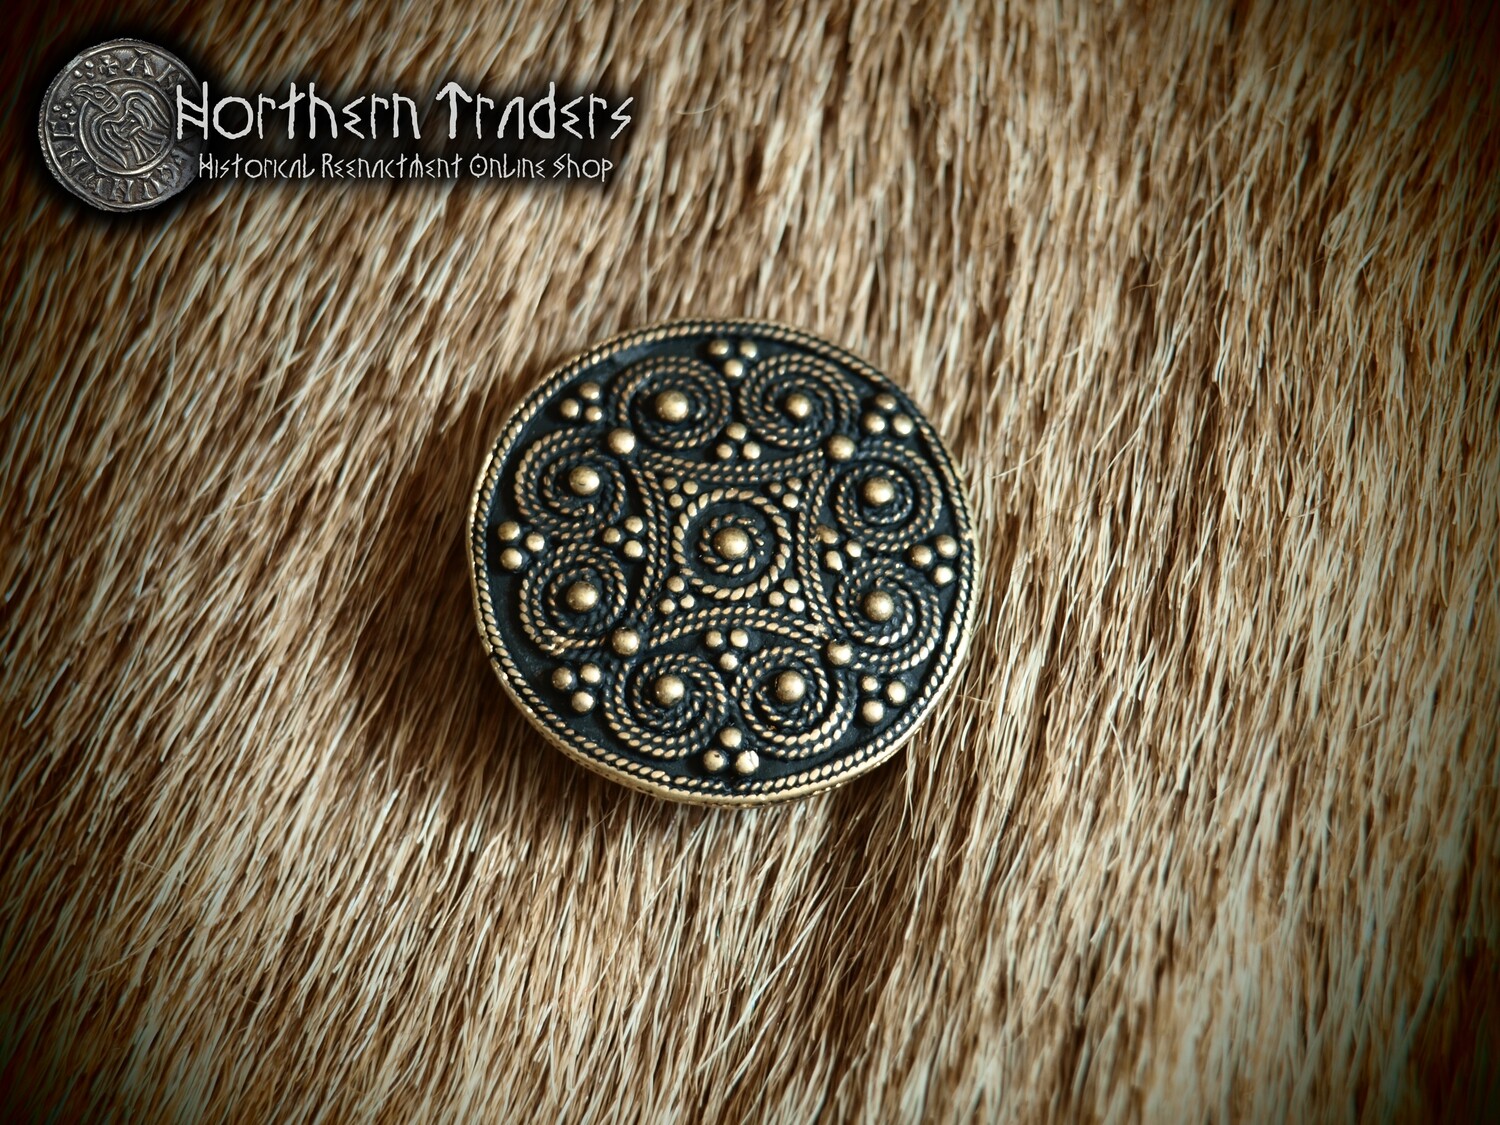 Disc Brooch with Granulation and Filigree